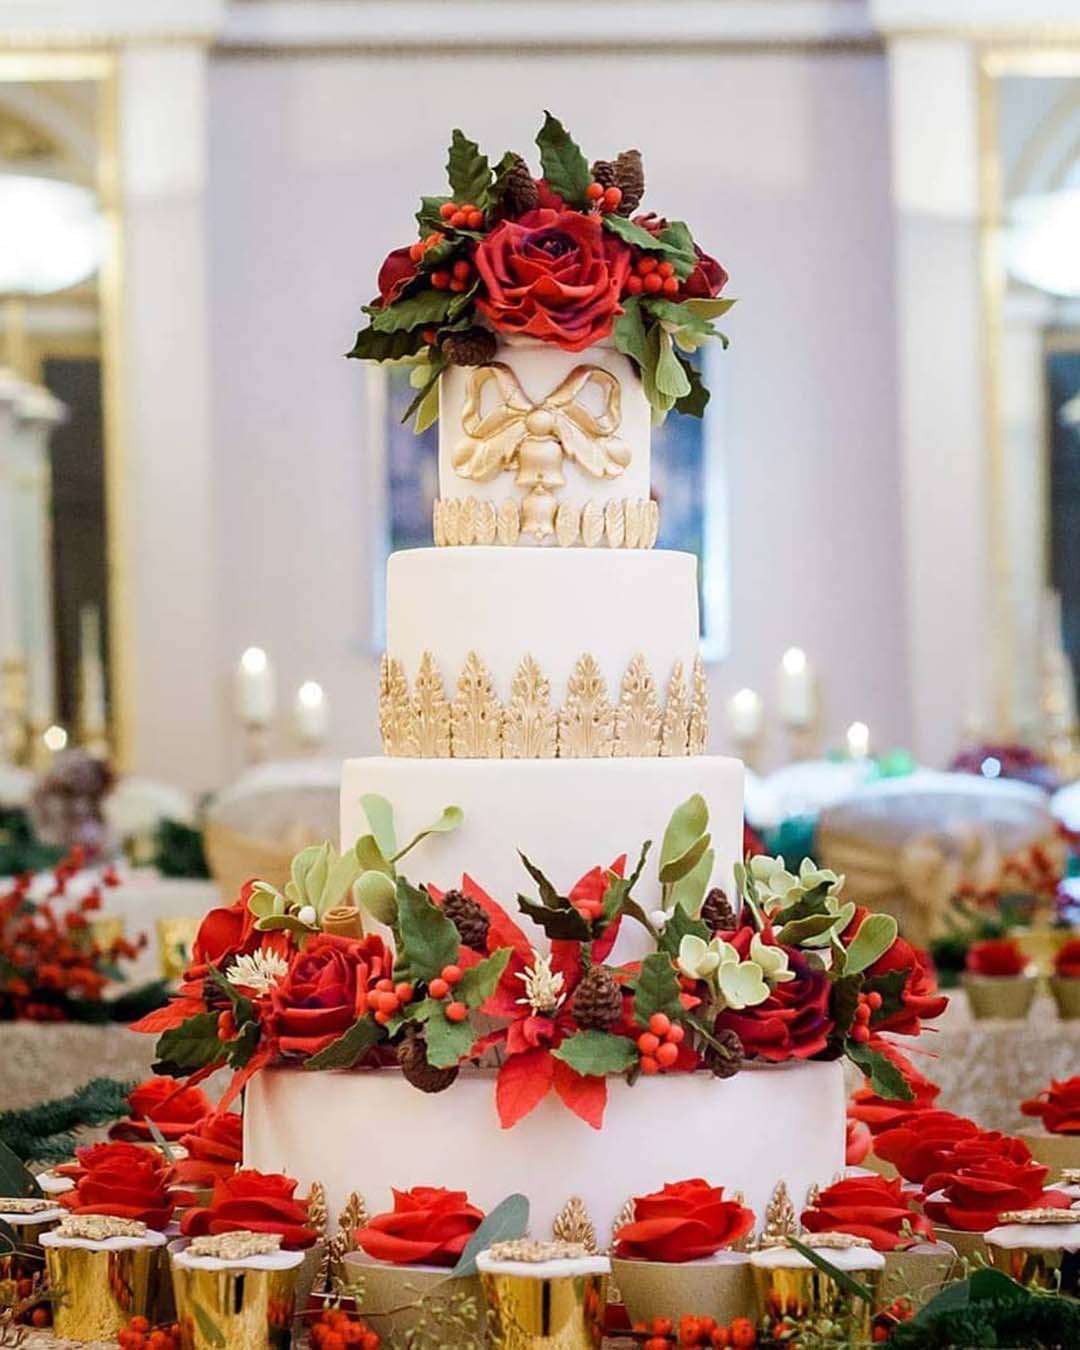 winter wedding cakes huge tall white gold with red flowers and greenery elizabethscakeemporium